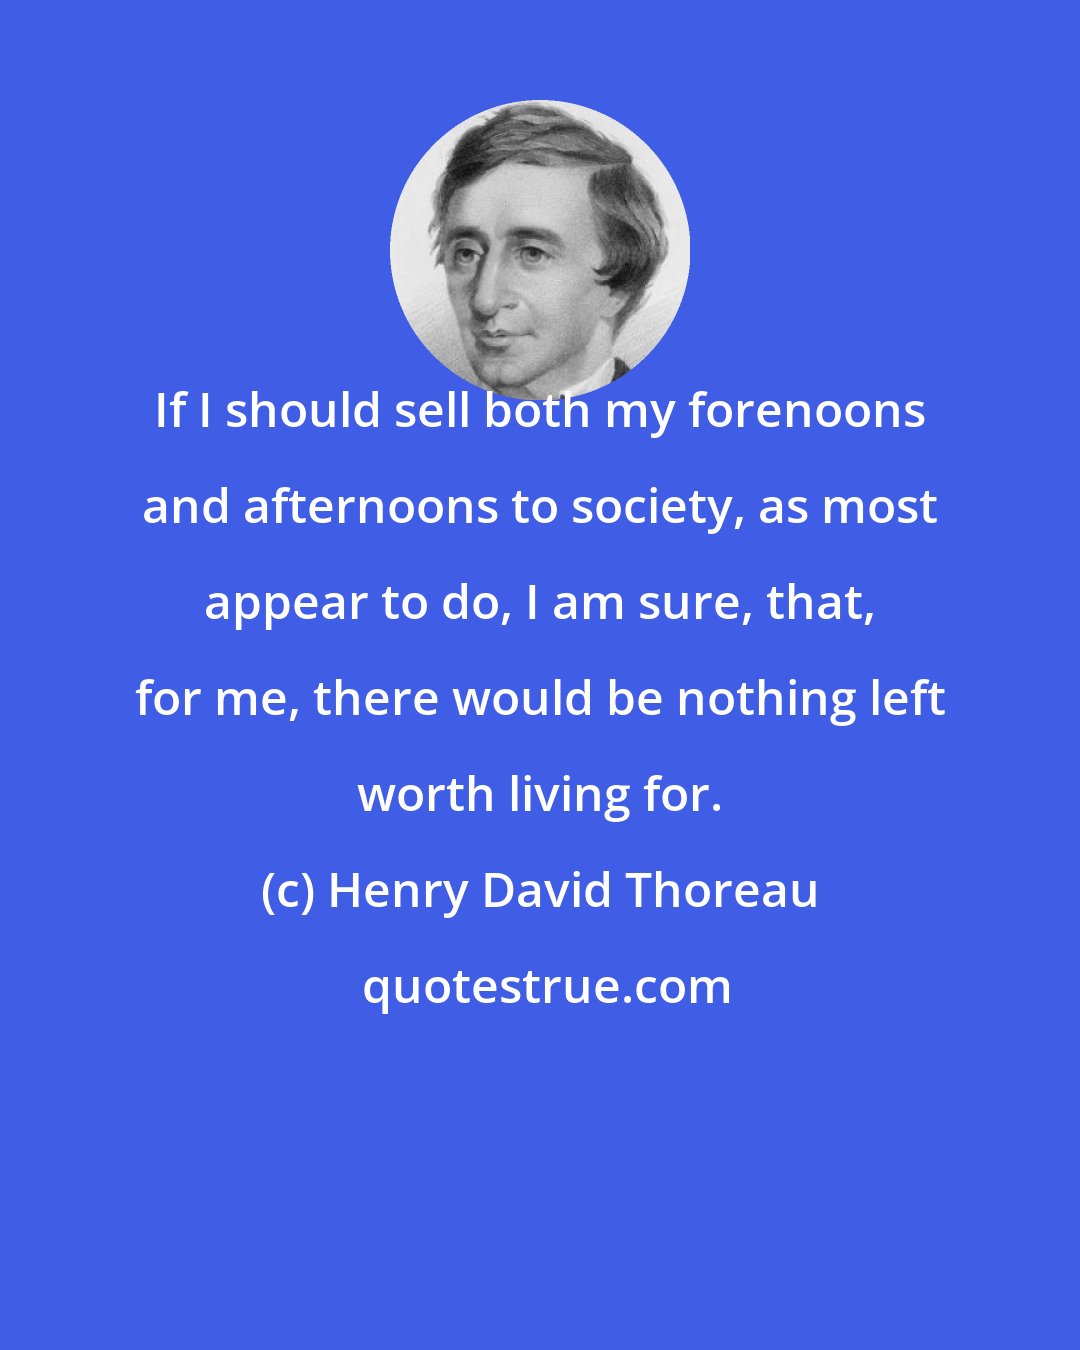 Henry David Thoreau: If I should sell both my forenoons and afternoons to society, as most appear to do, I am sure, that, for me, there would be nothing left worth living for.